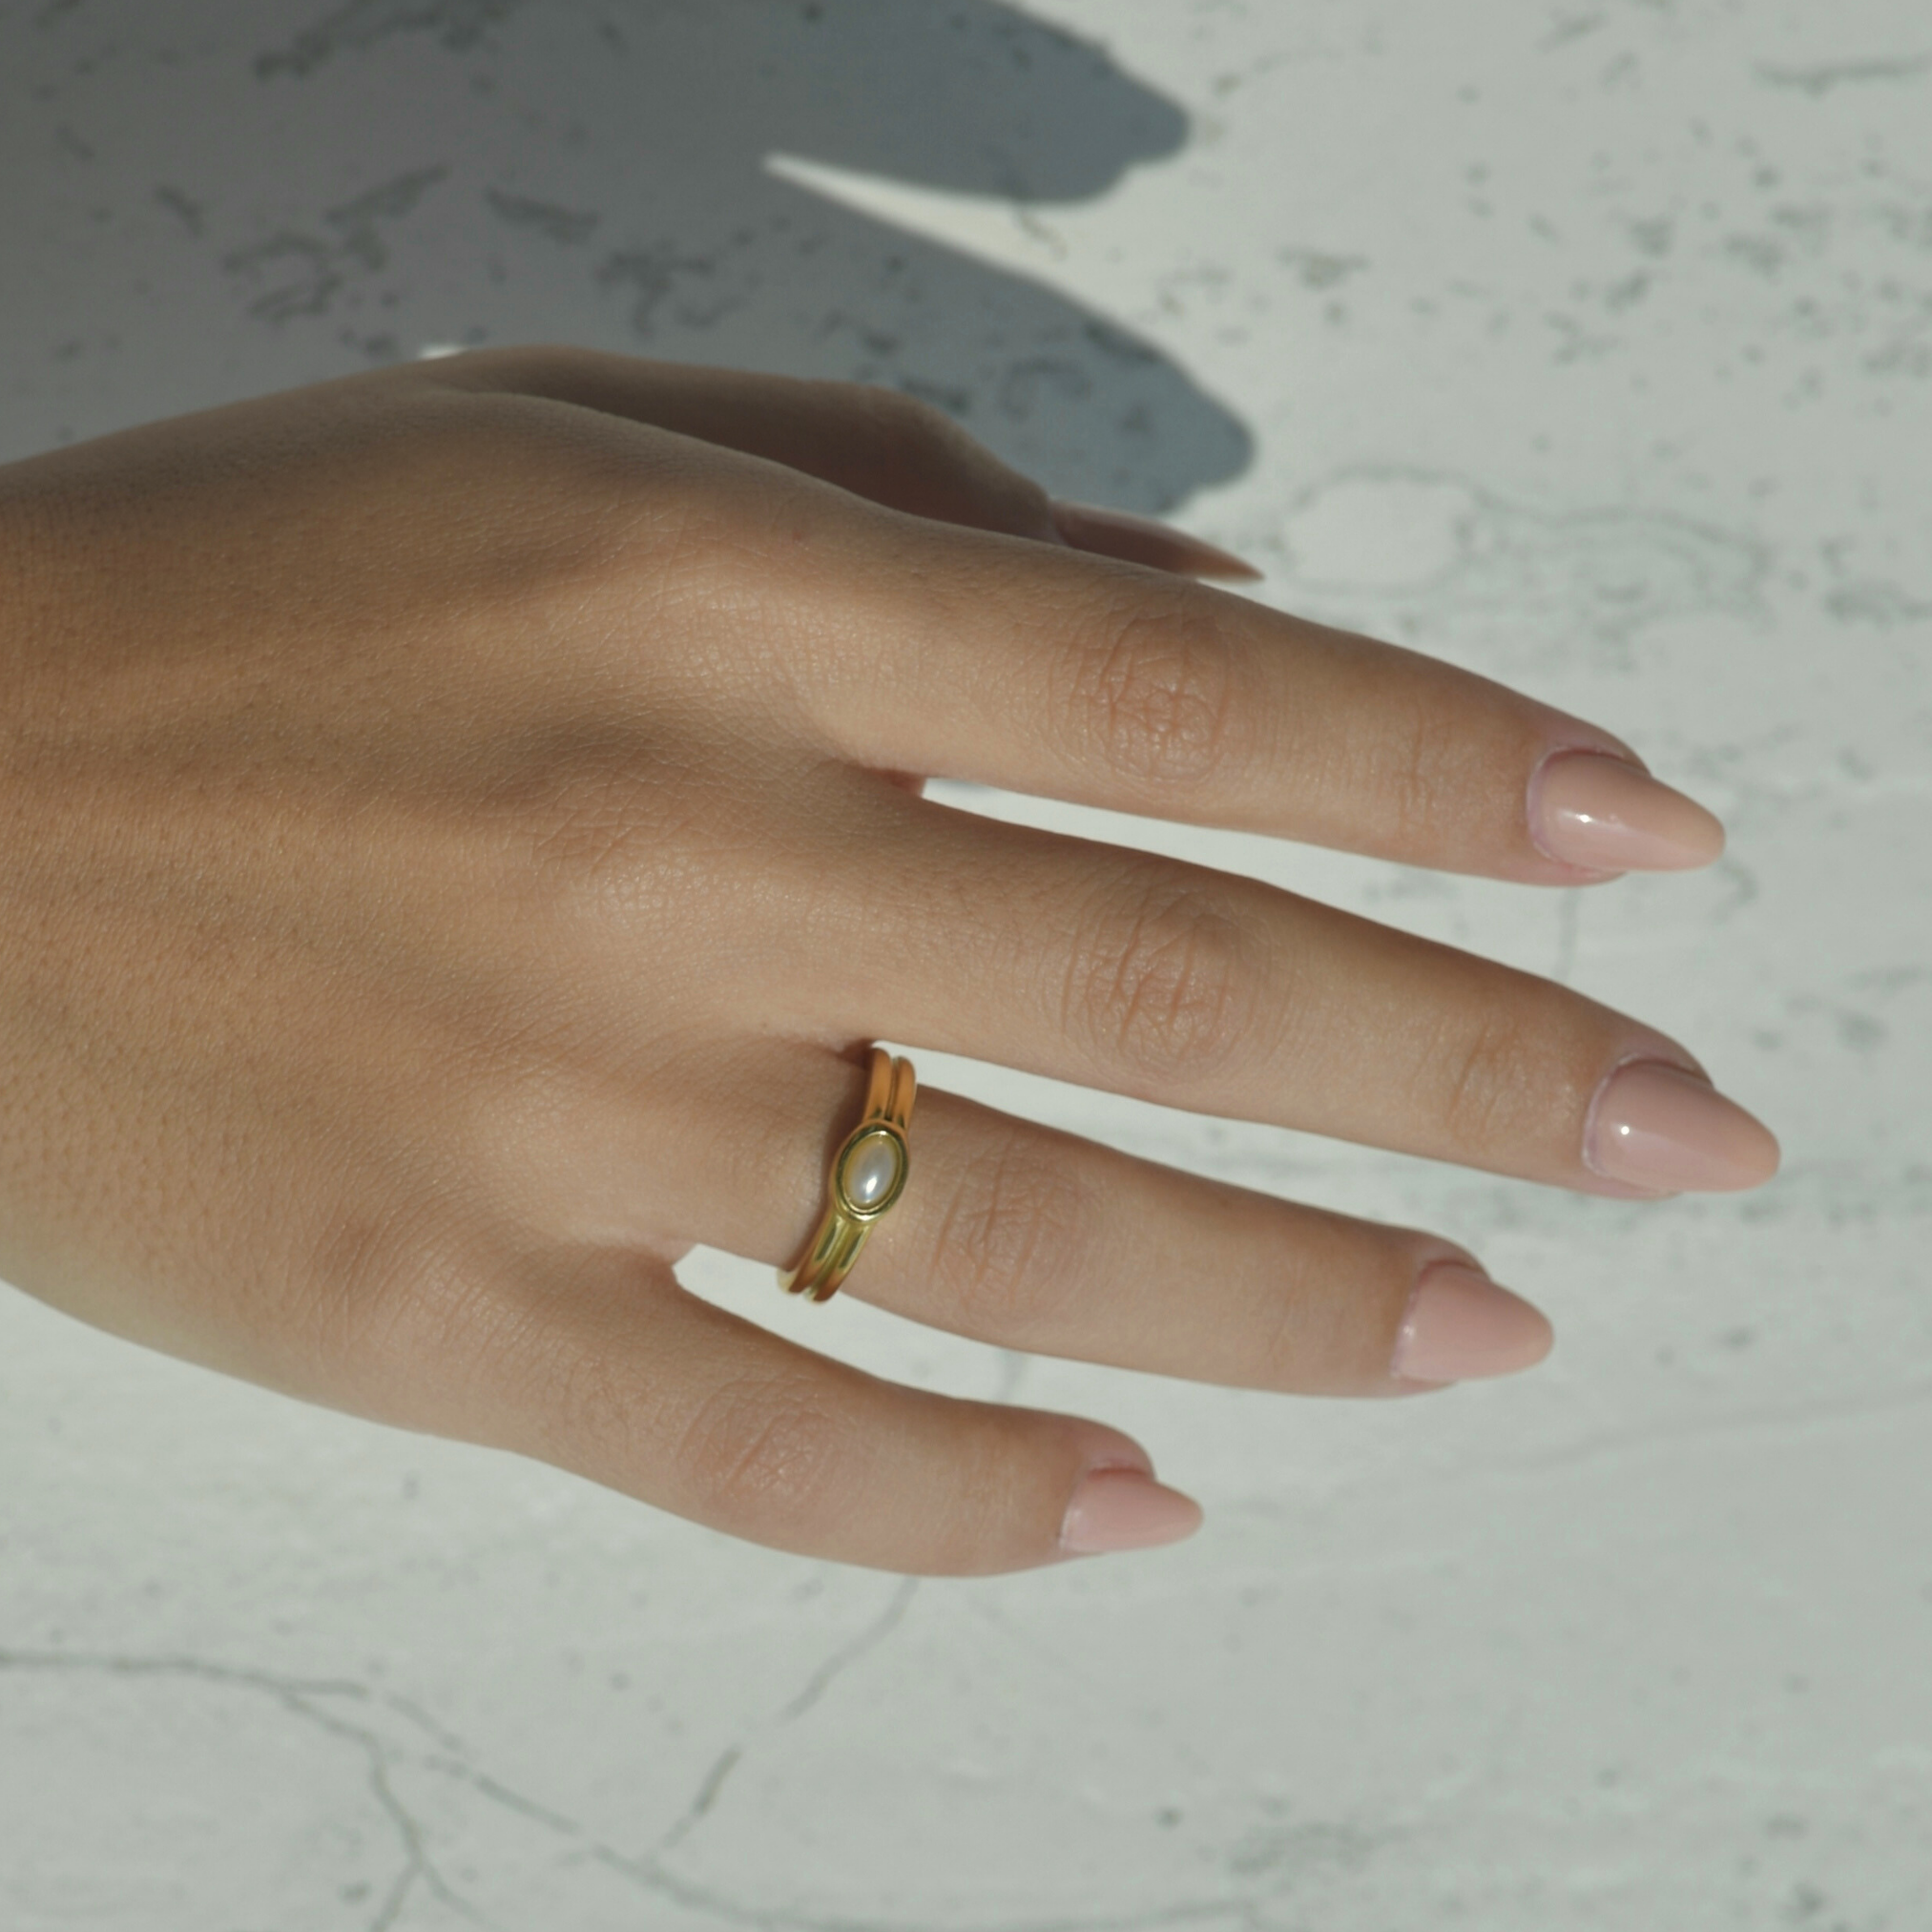 Santorini Pearl Gold Halo Ring. Gold ring with an oval horizontal shape in the middle of the ring.